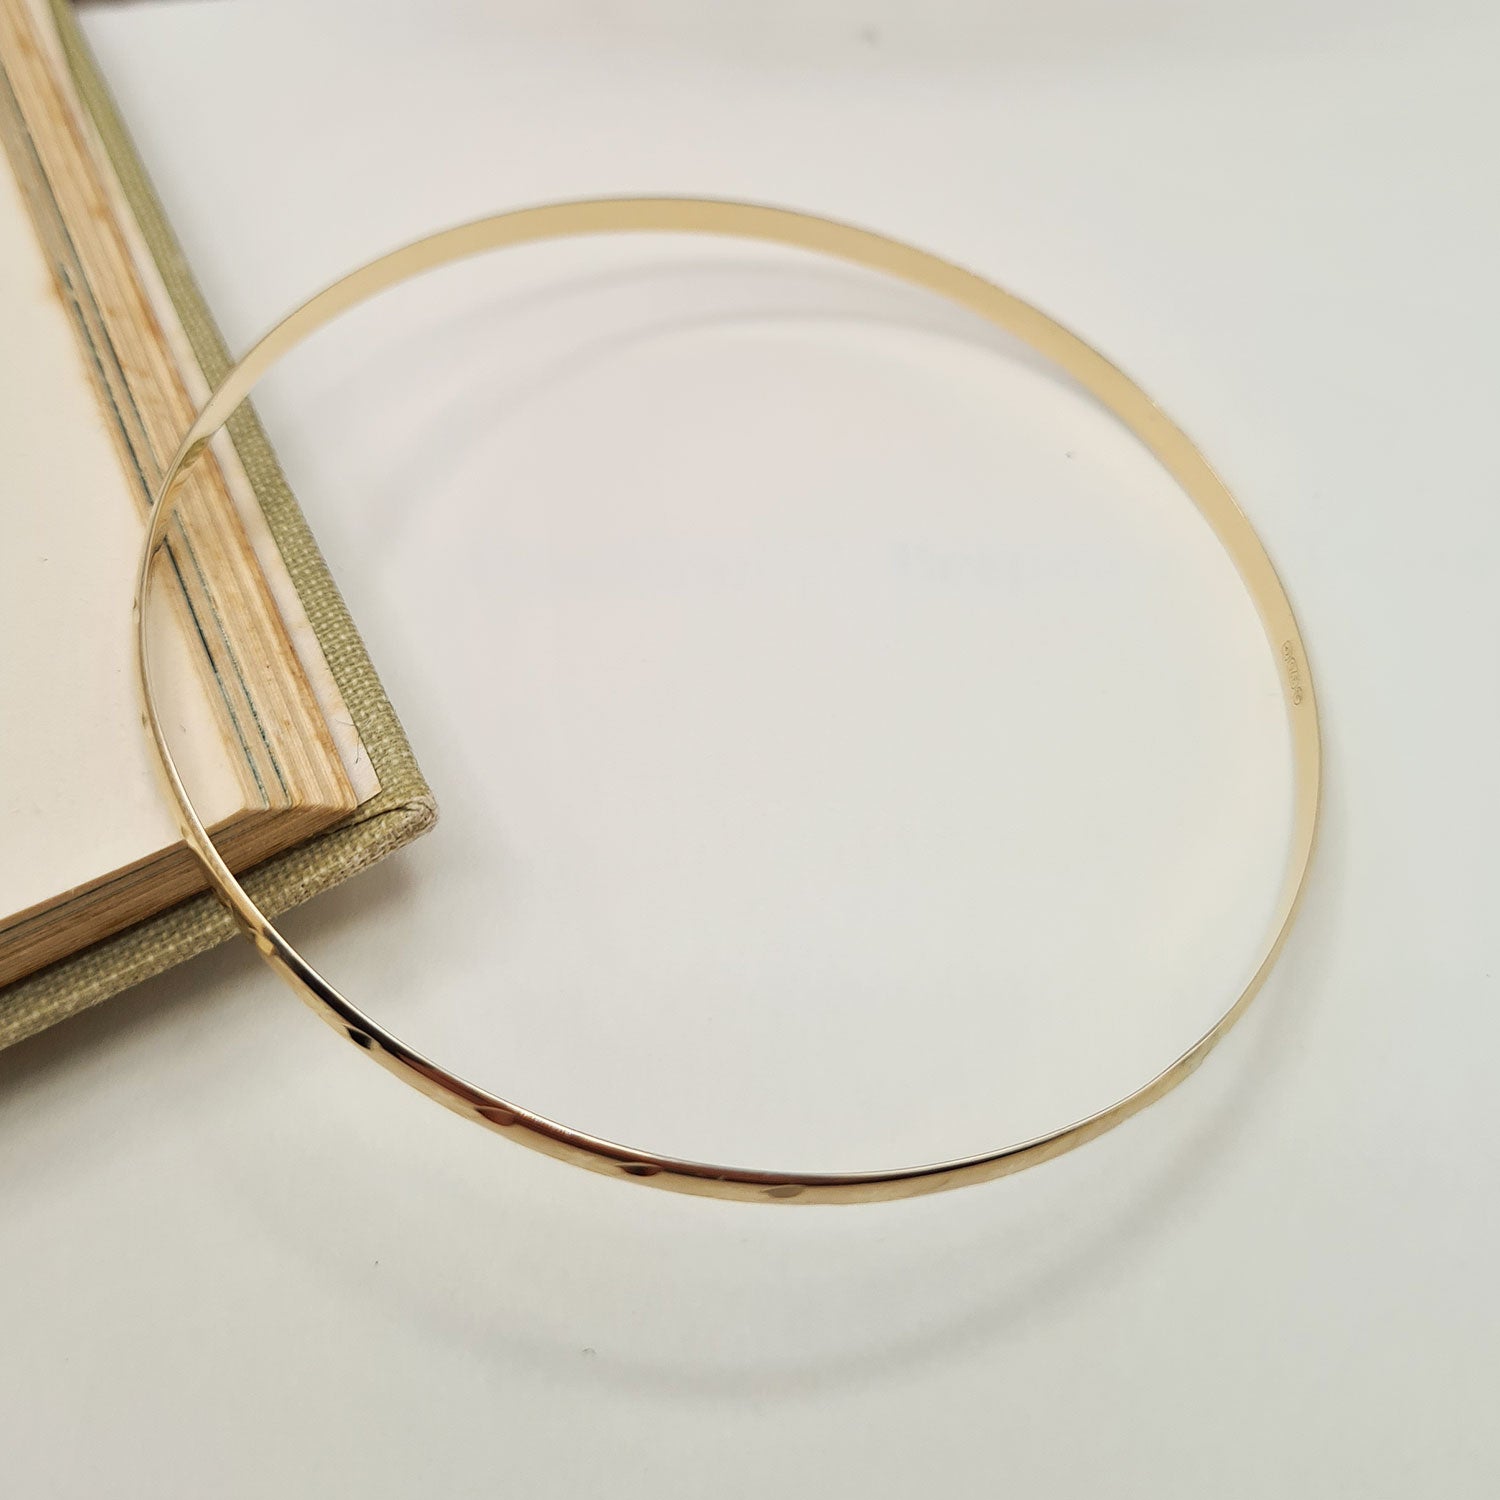 women's gold bangle made from D-shaped wire